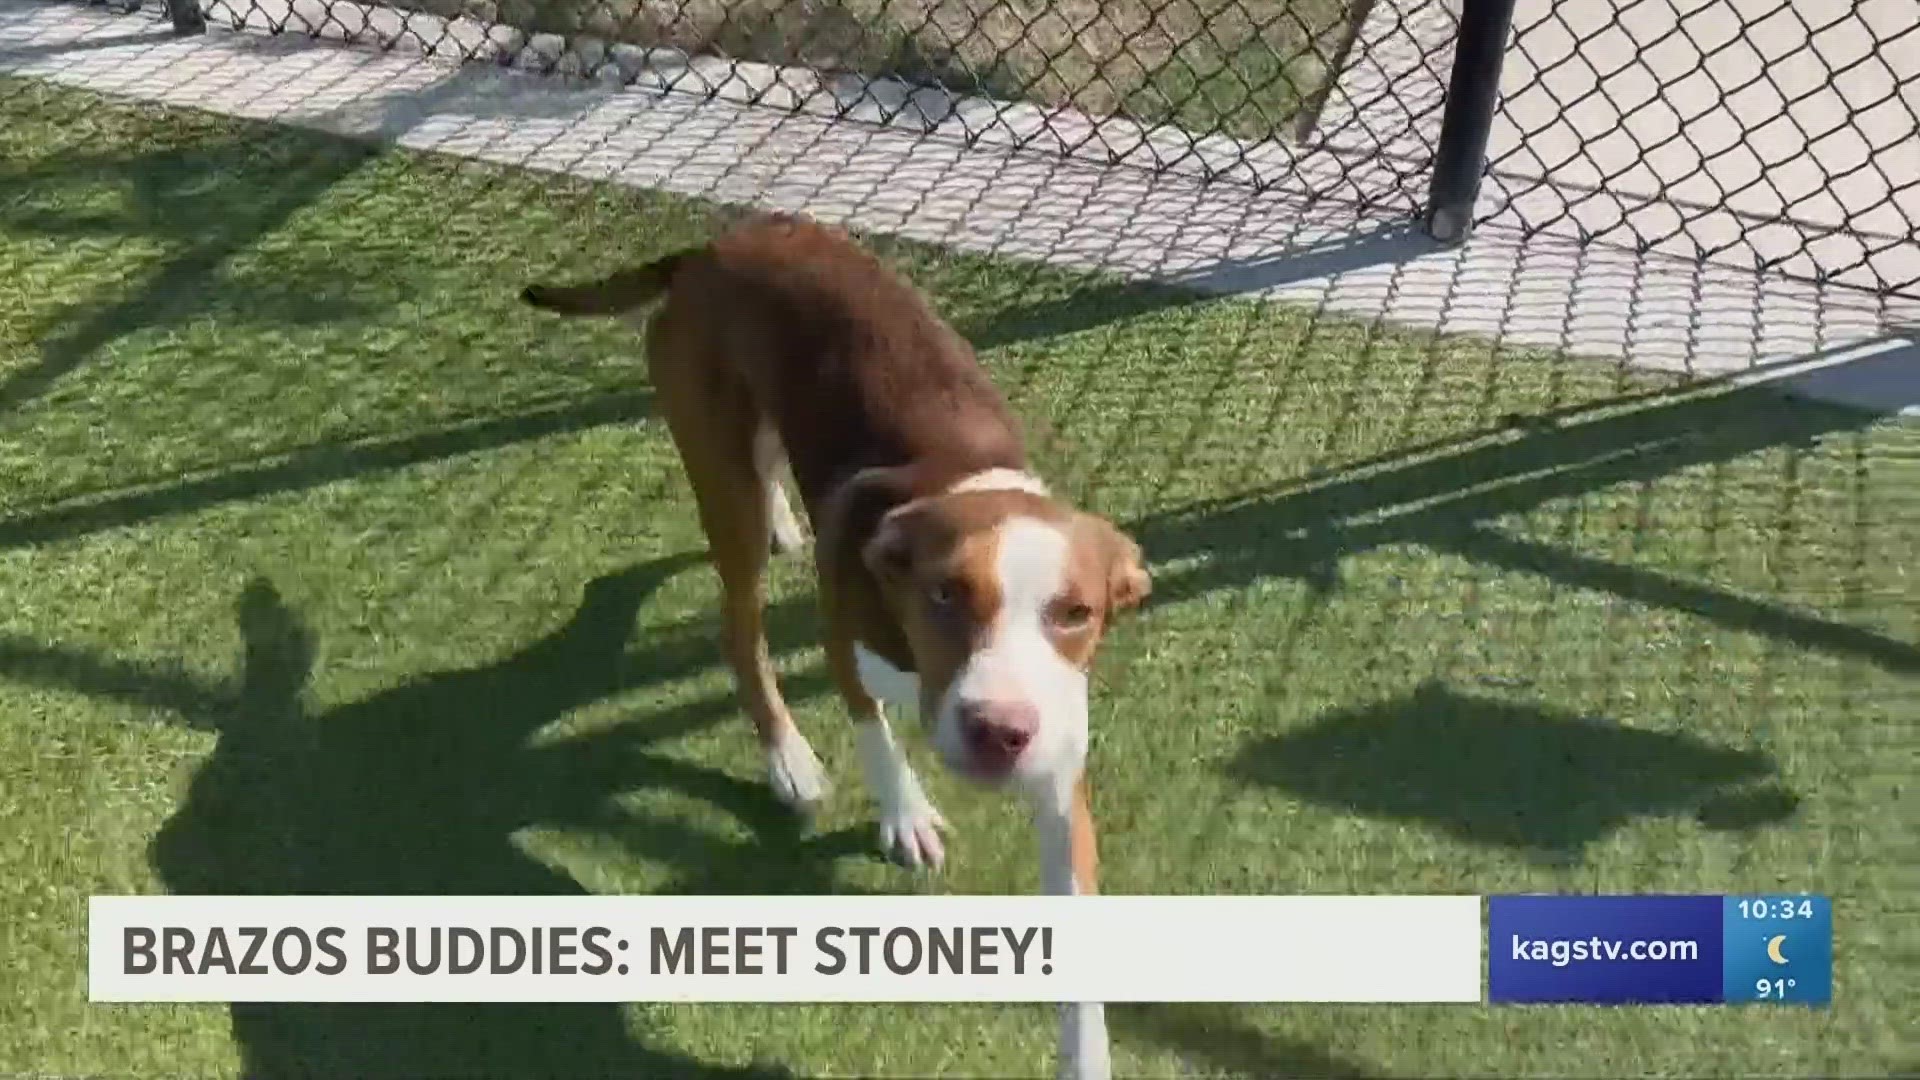 This week's featured Brazos Buddy is Stoney, a one year-old Hound mix that's looking to be adopted.